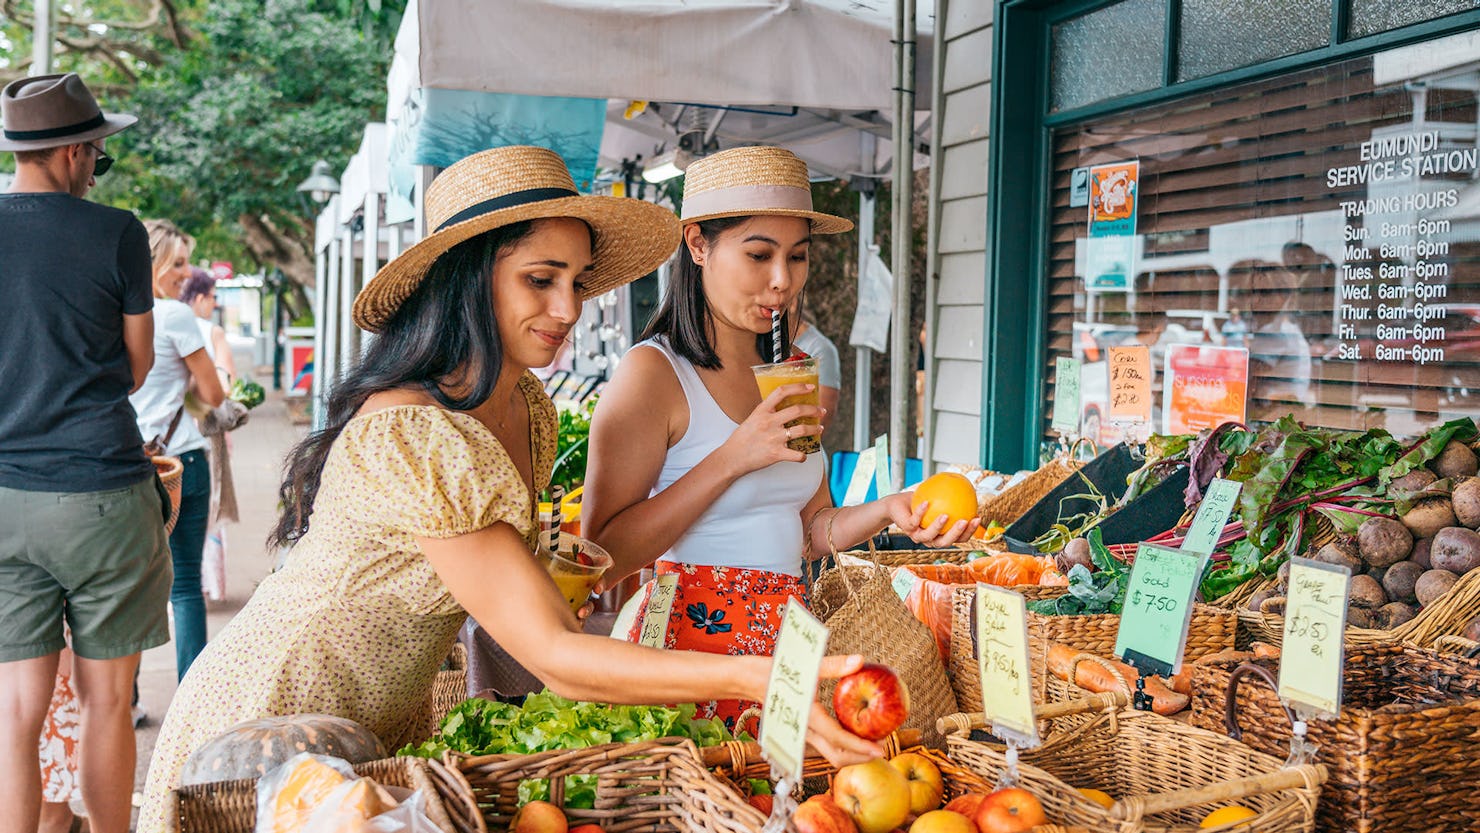 12 of the Sunshine Coast’s best markets to check out